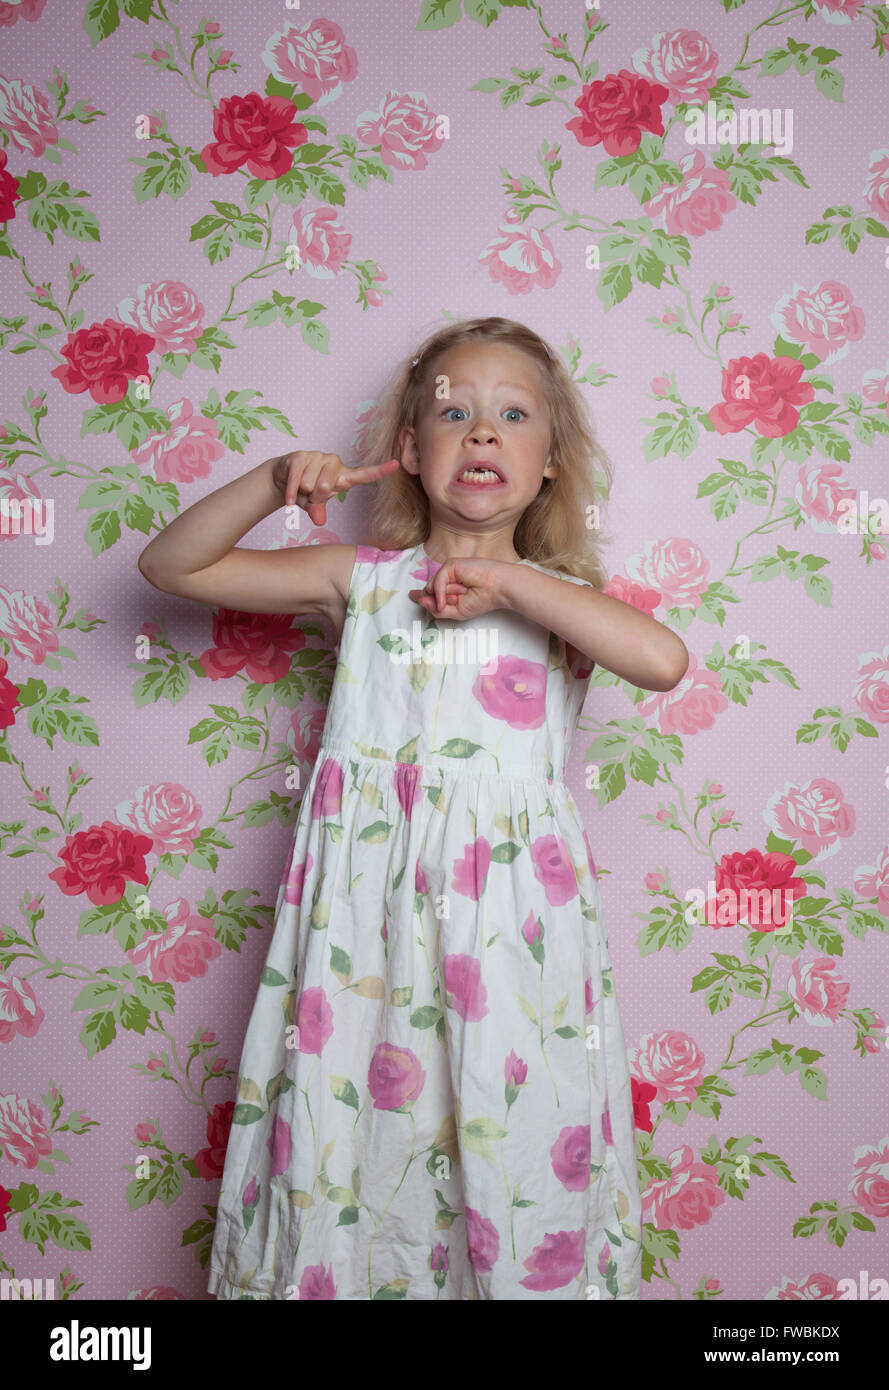 Girl with a patterned wall paper pulling face Stock Photo